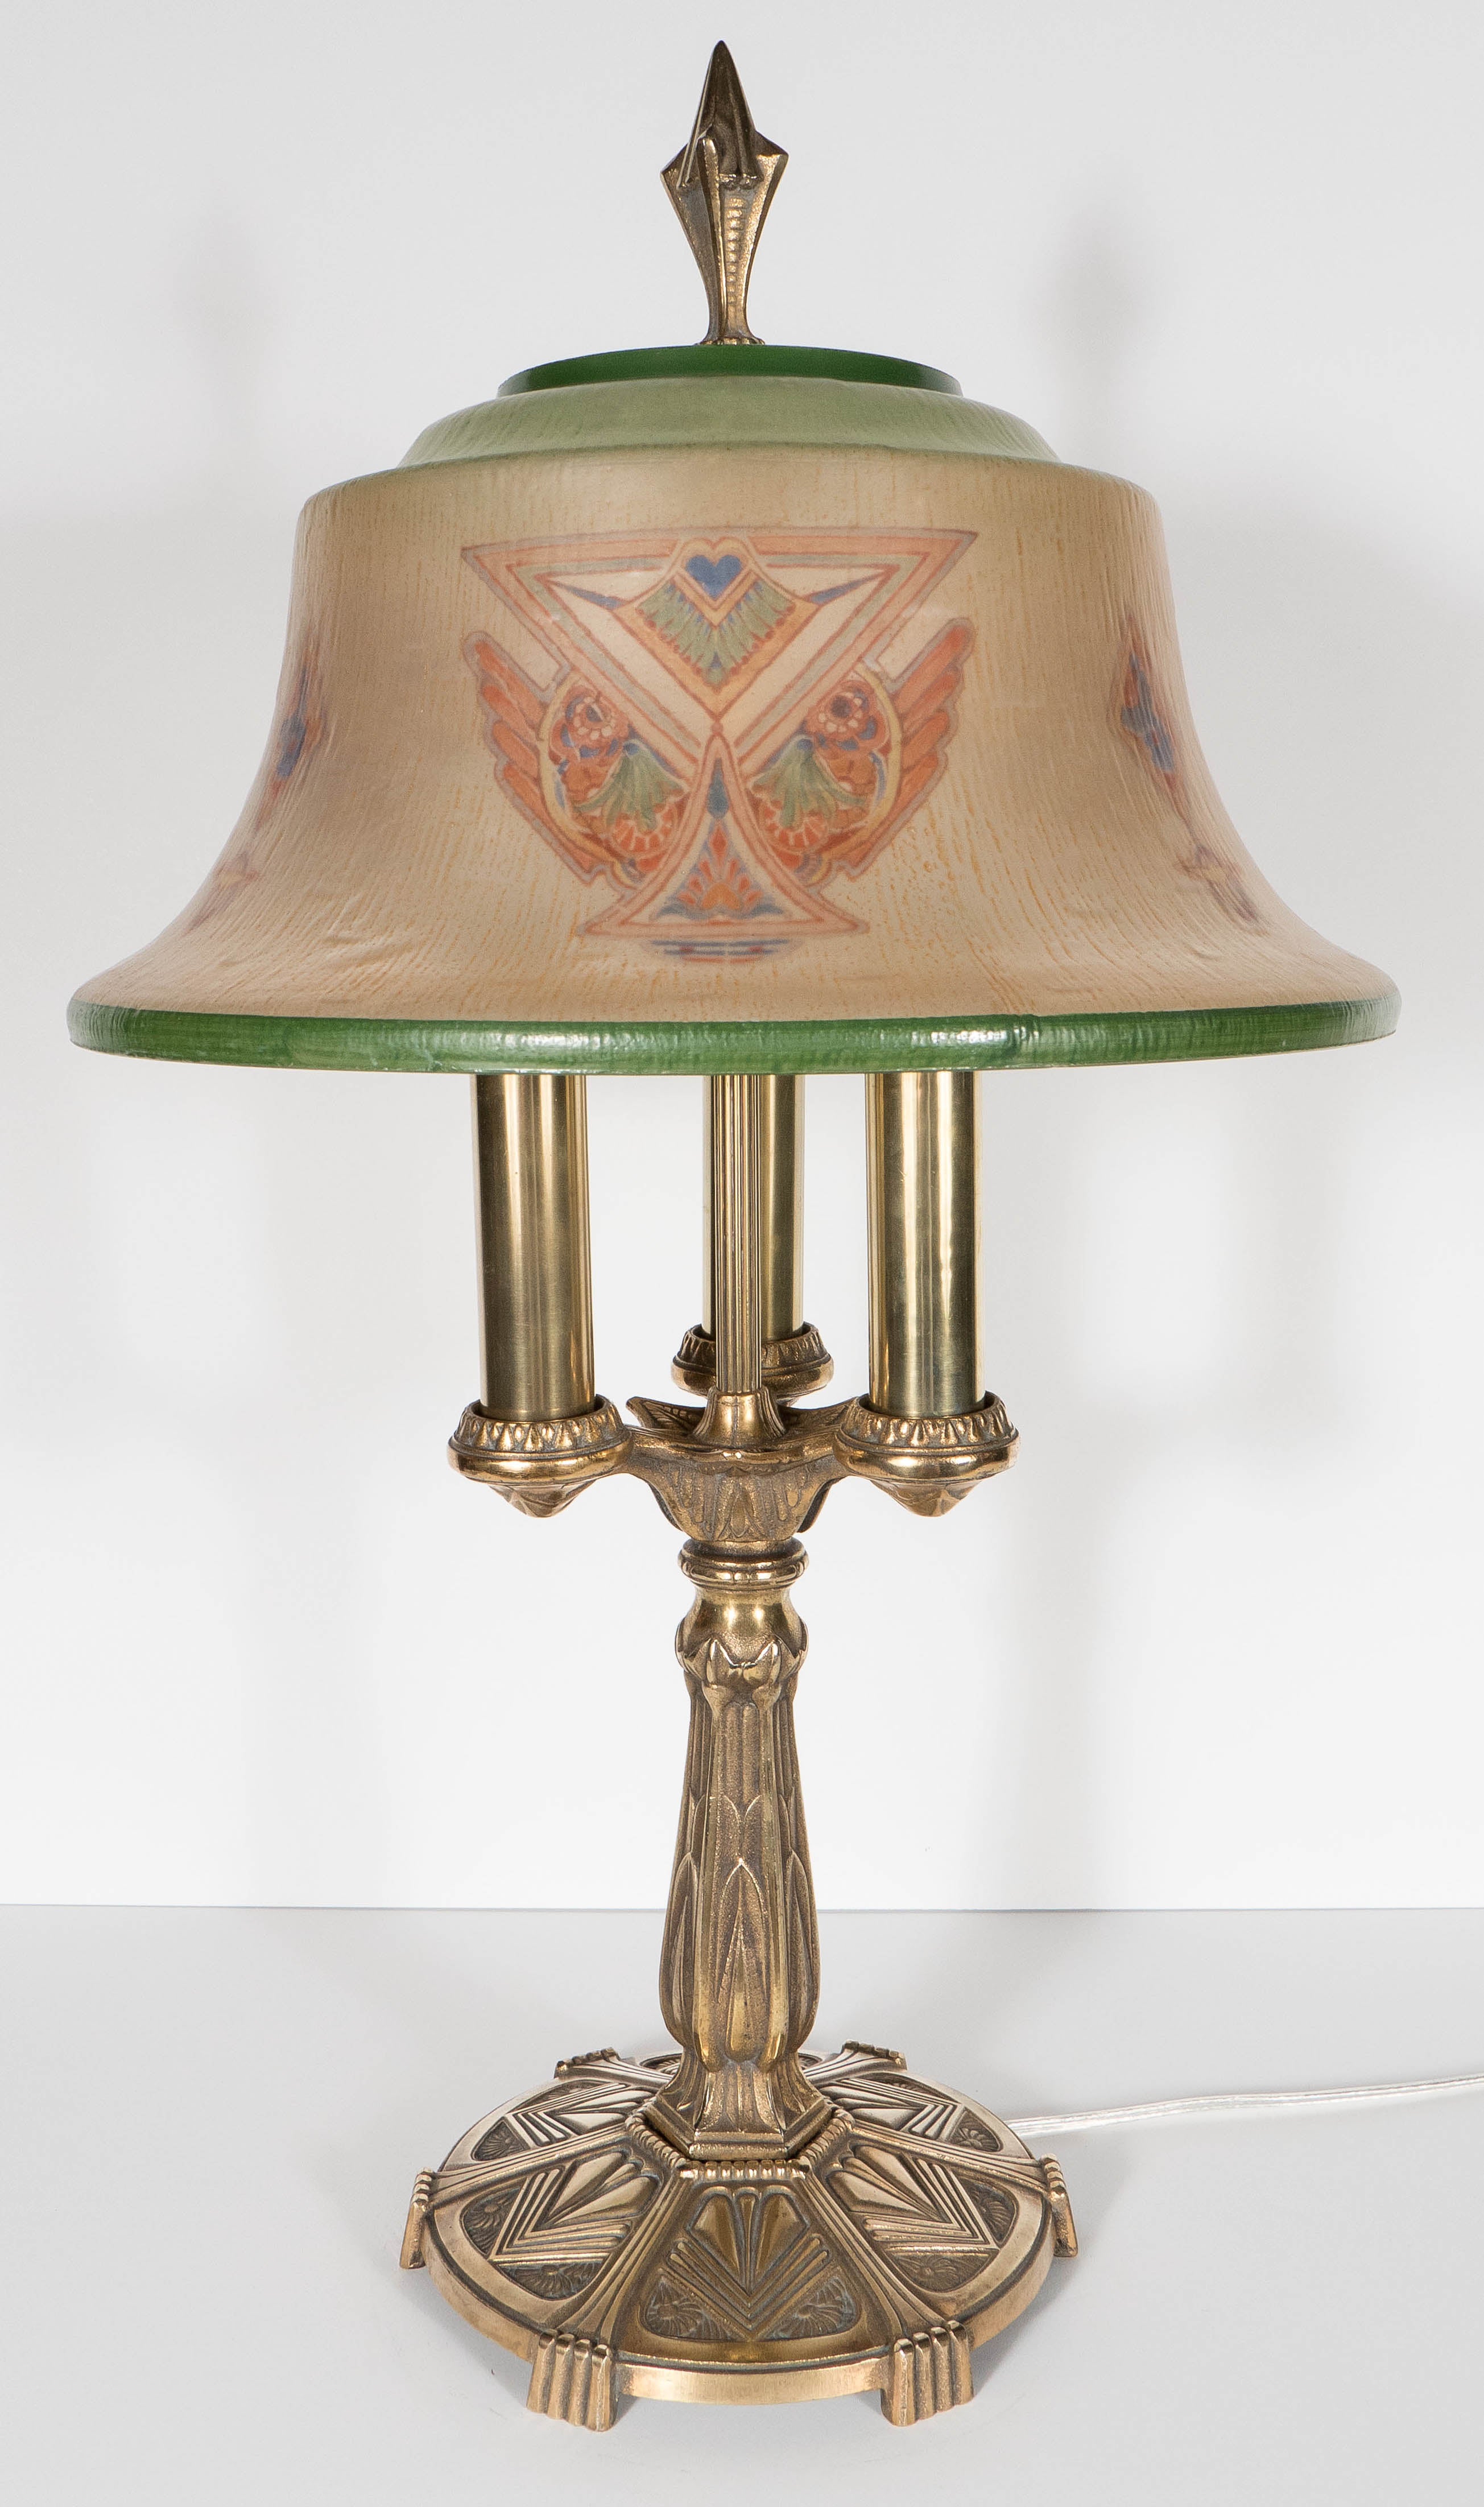 Art Deco Reverse Painted and Brass Table or Desk Lamp by Pairpoint